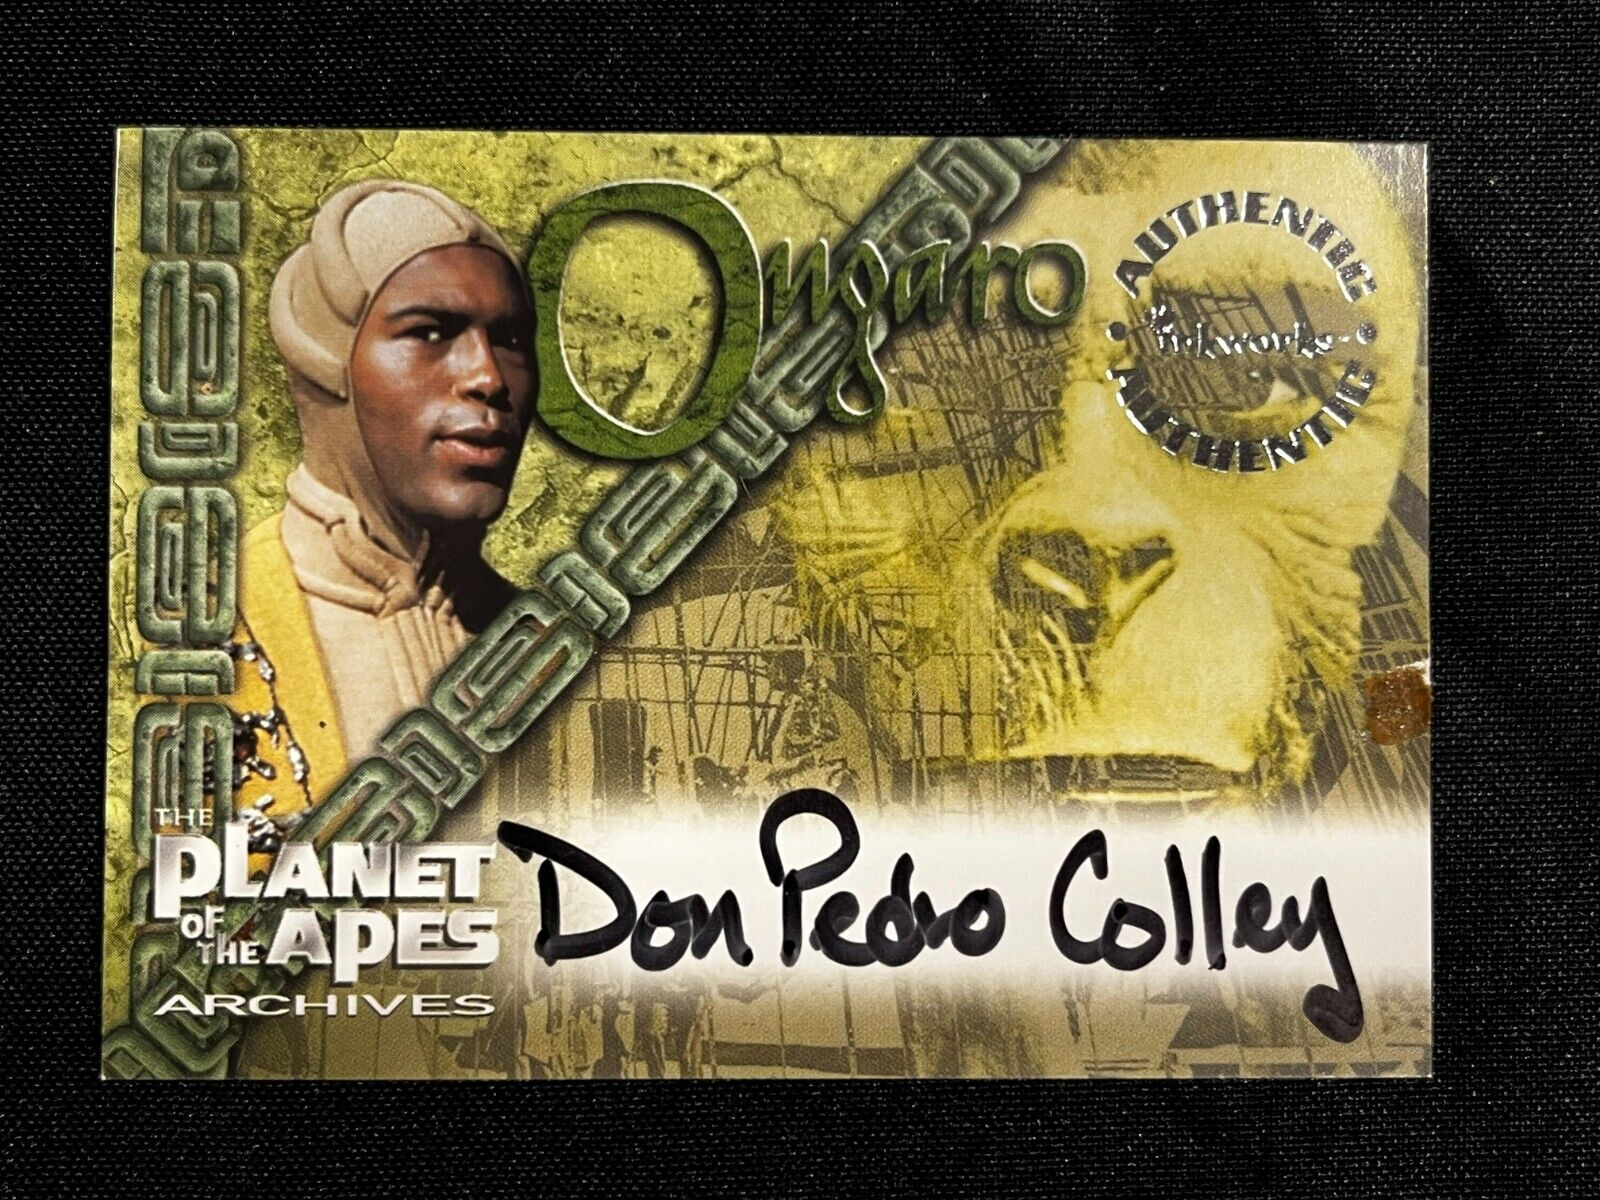 1999 Inkworks Planet of the Apes Don Pedro Colley Ongaro A4 autographed card AA 